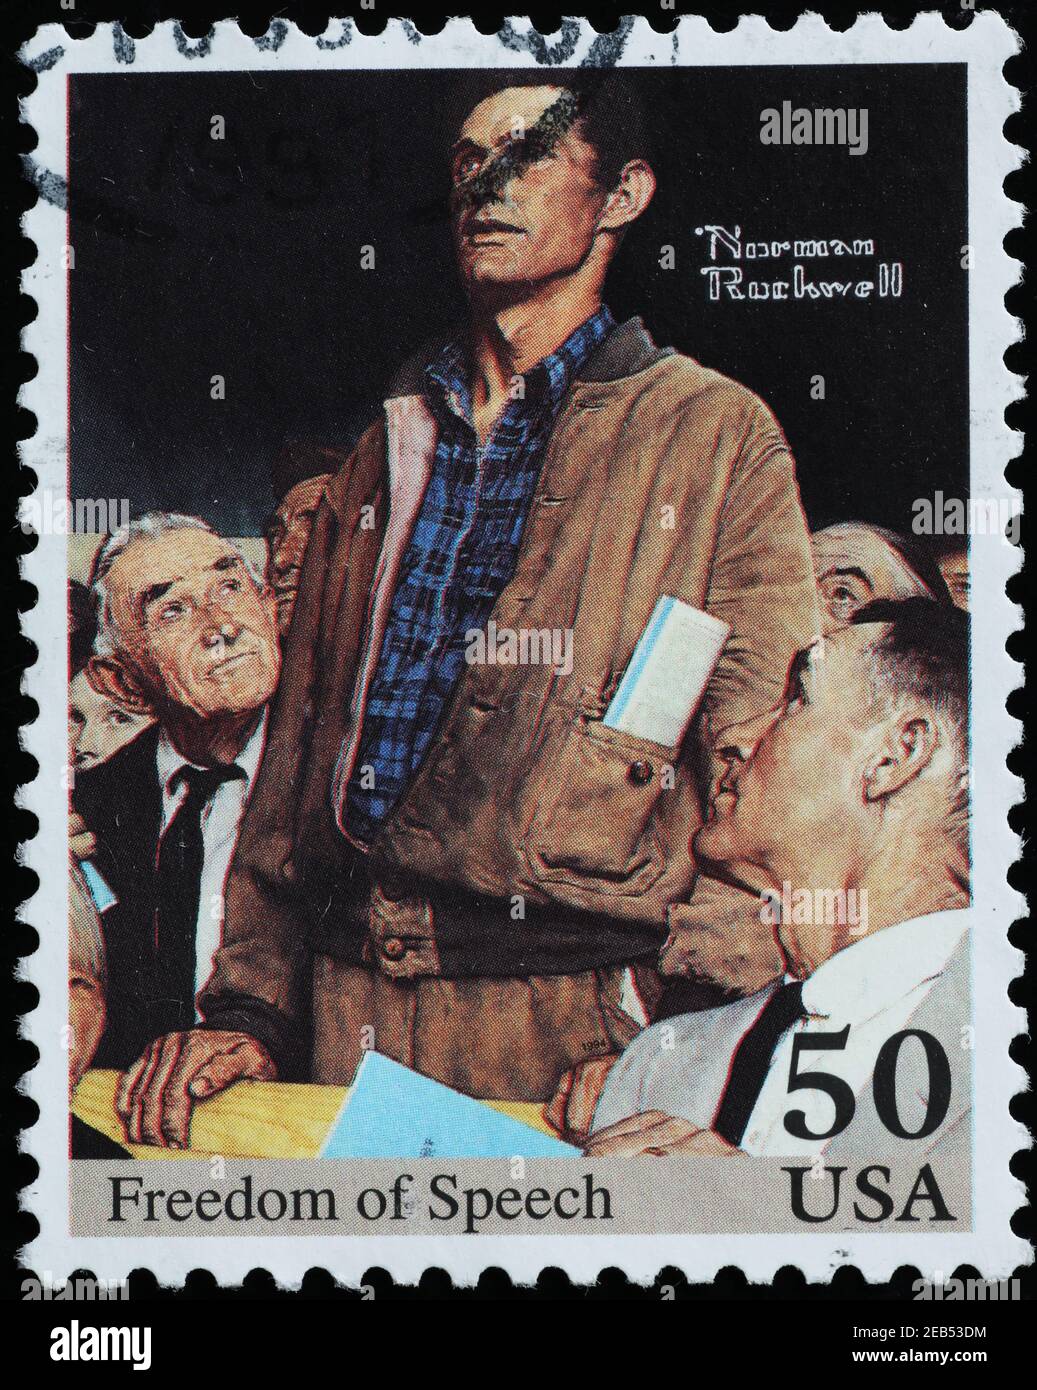 Freedom of speech in illustration by Norman Rockwell on american stamp Stock Photo